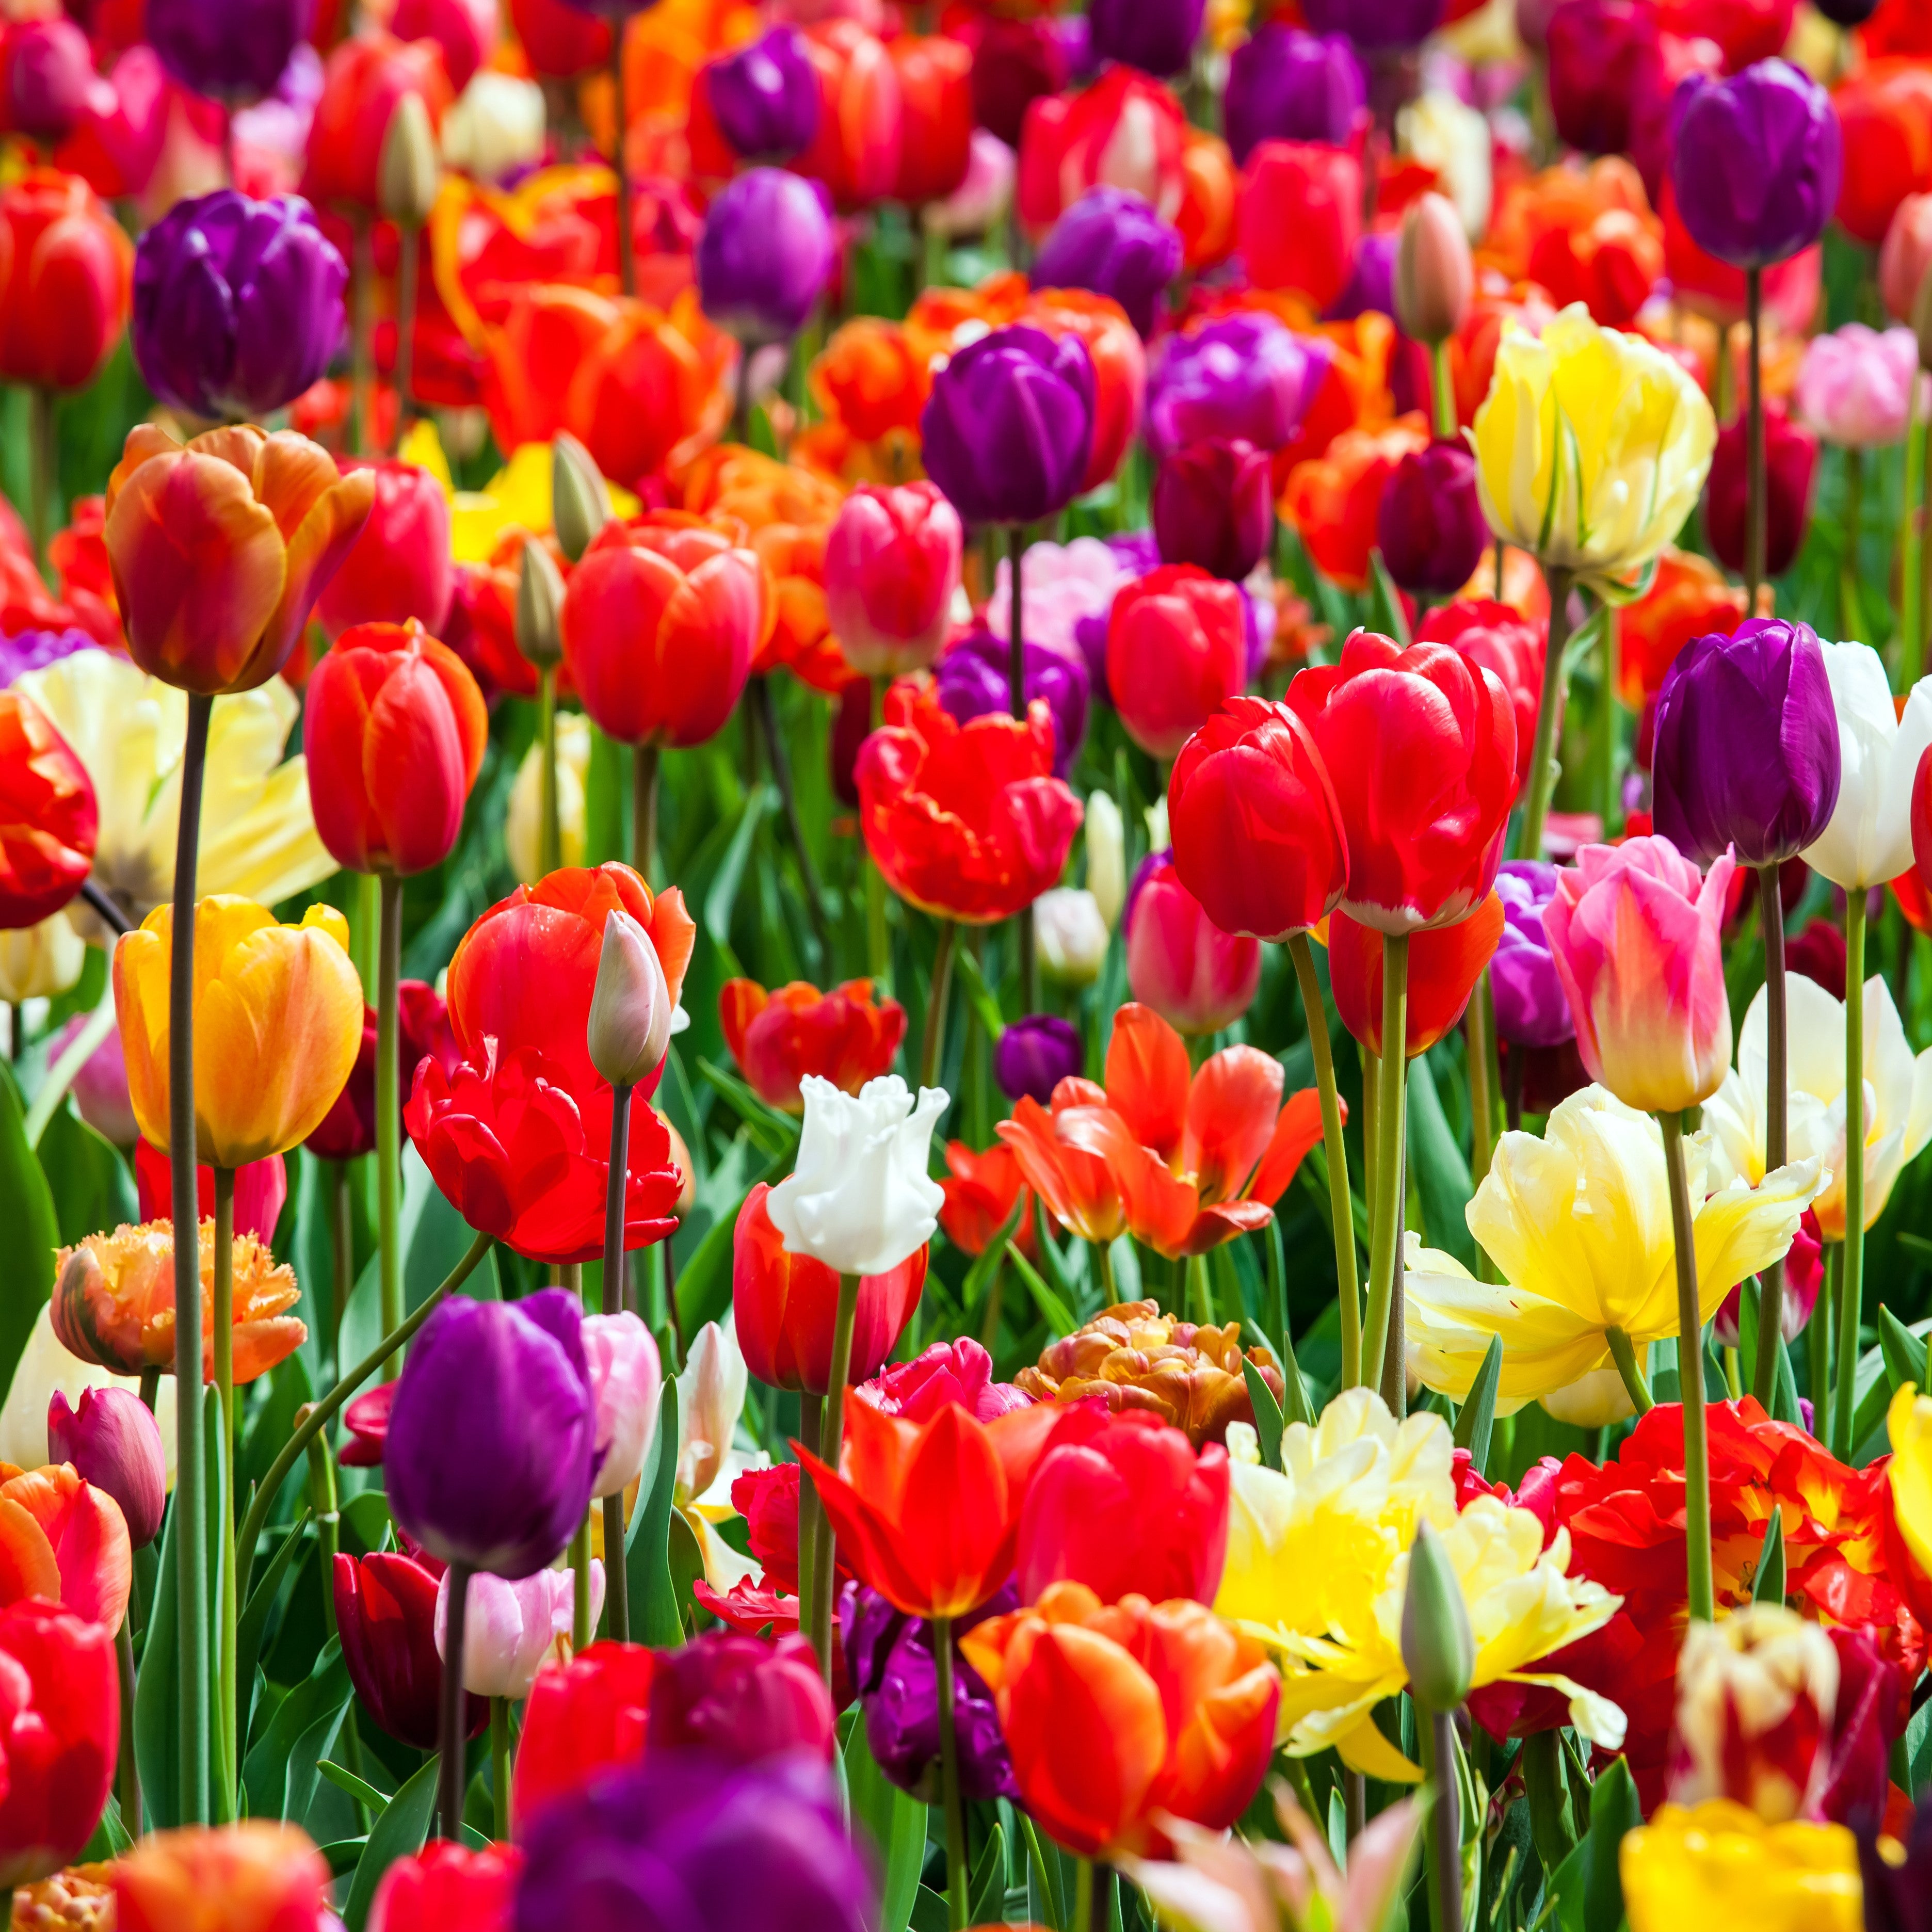 100 Multi-Colored Tulip Bulbs for Sale Online | Rainbow Mix – Easy To ...